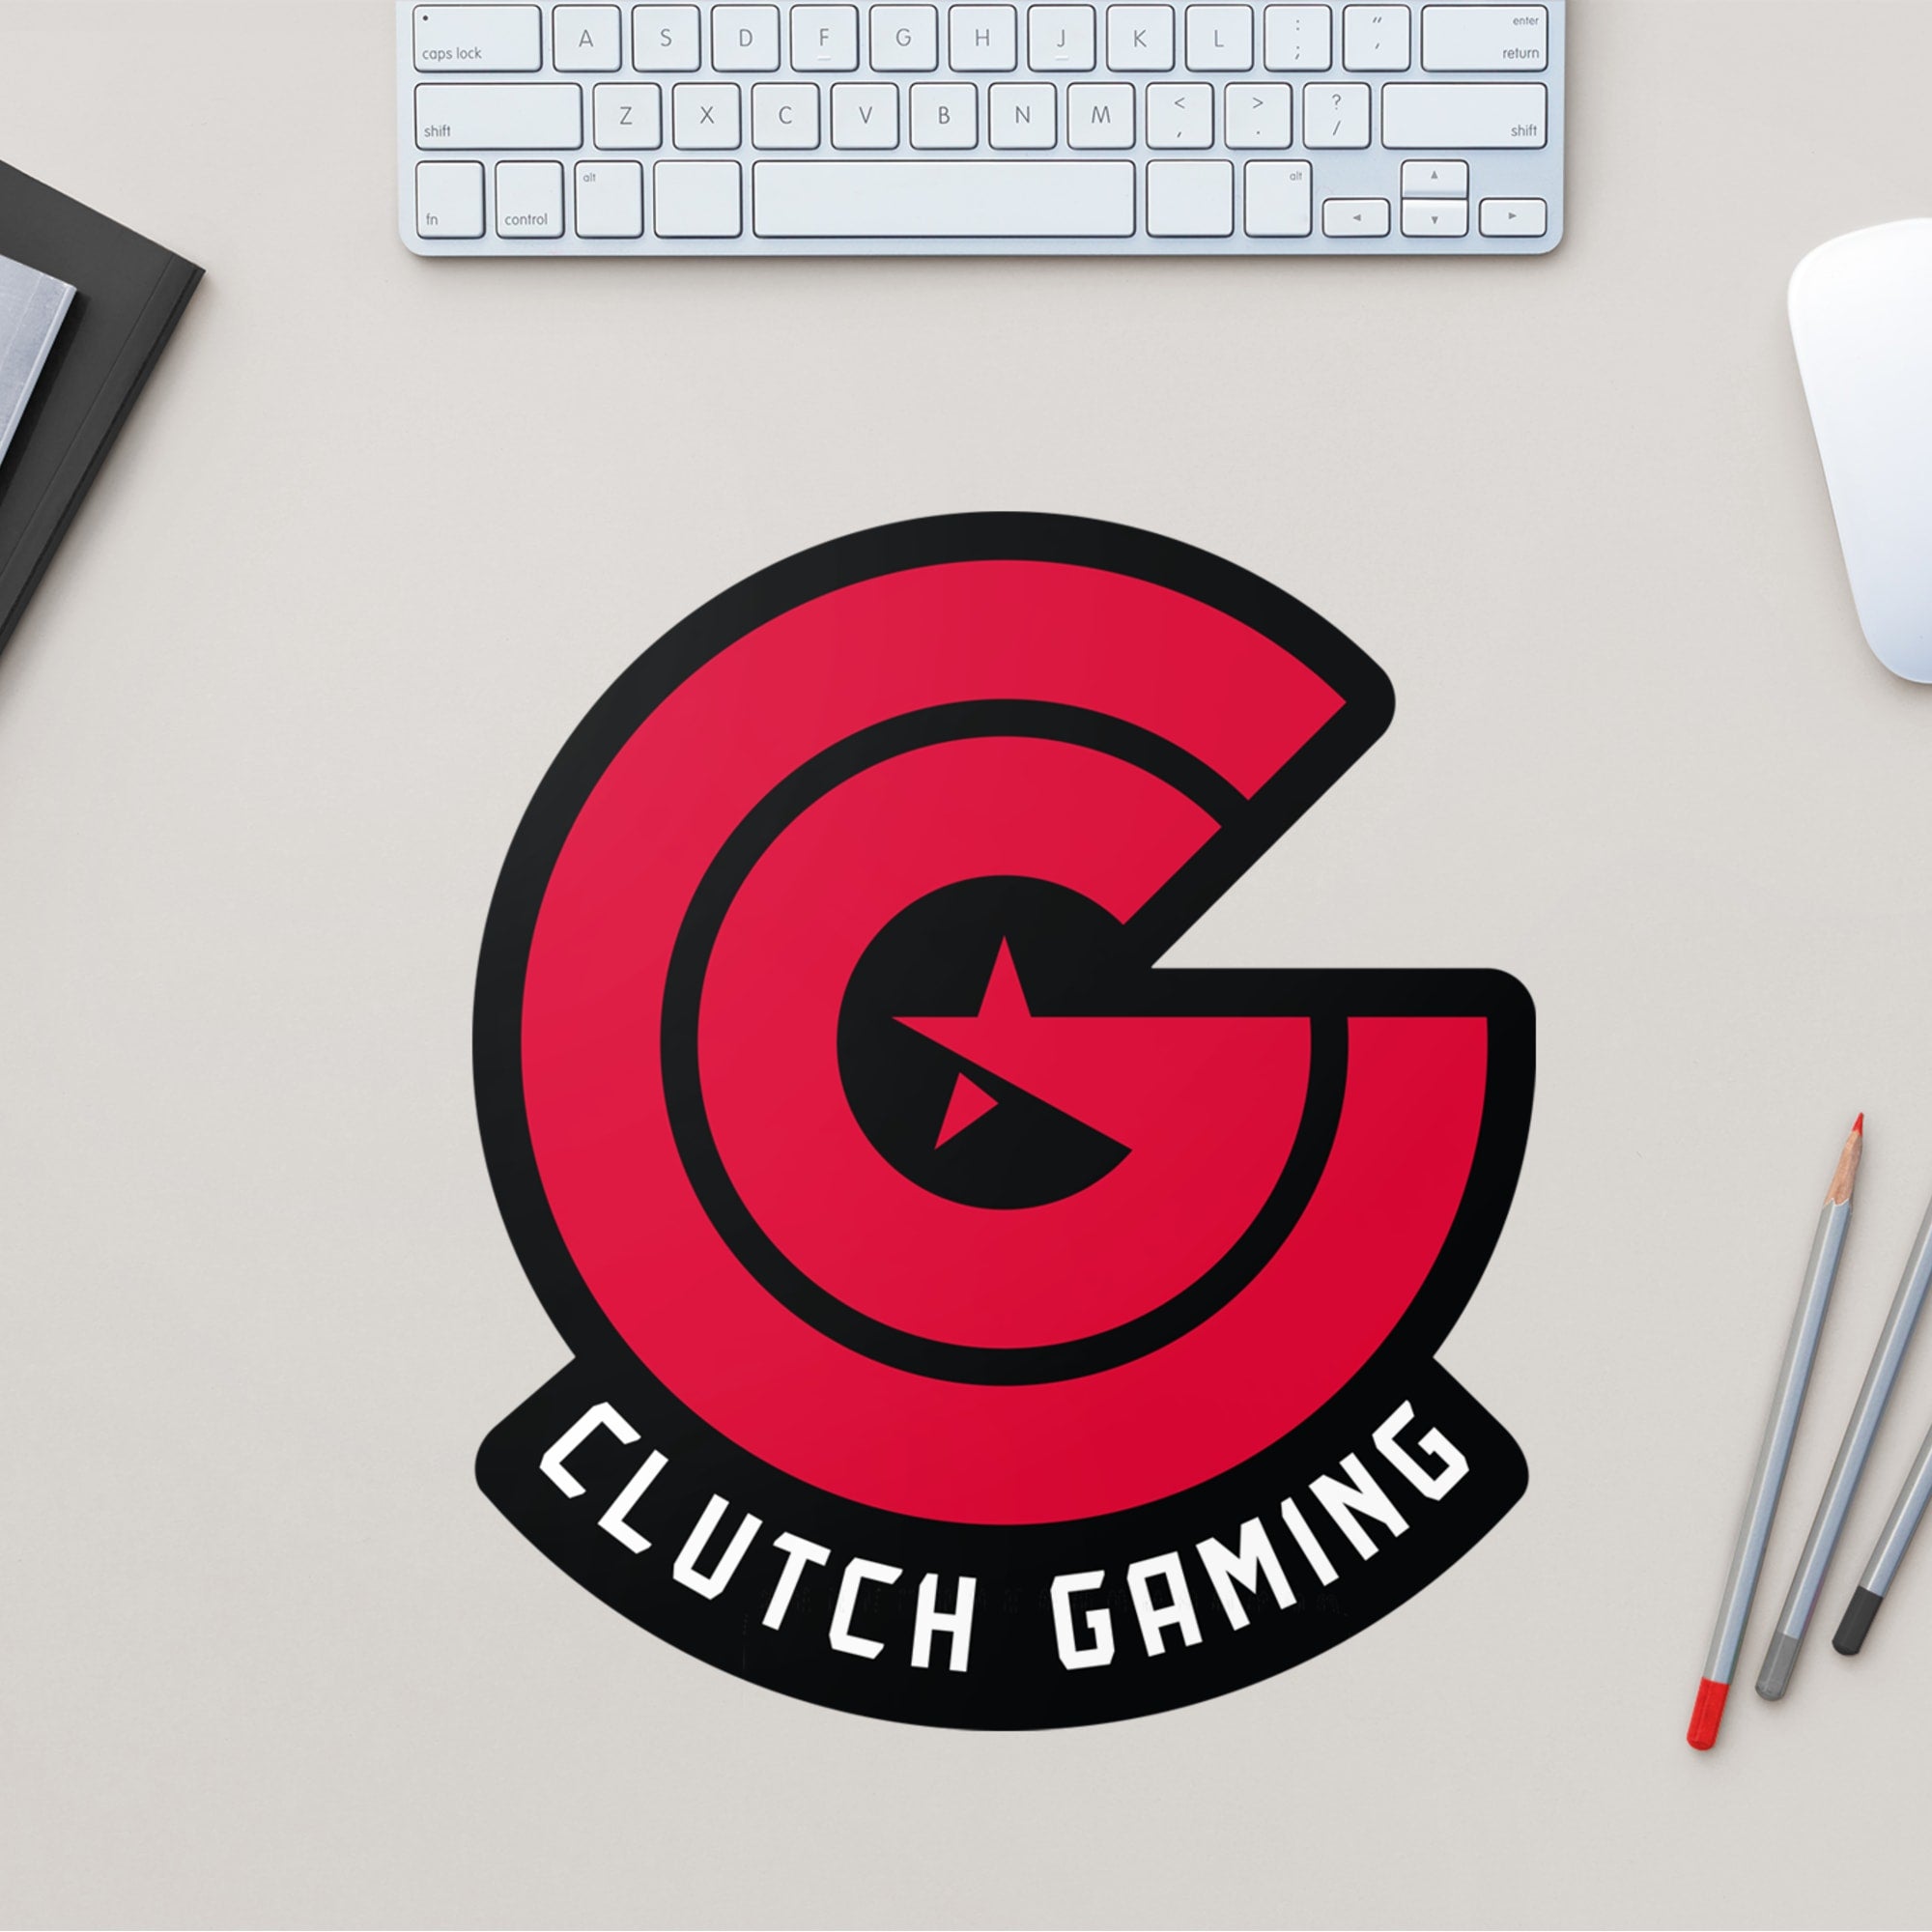 Clutch Gaming: Wordmark Logo - Officially Licensed Removable Wall Decal 10.0"W x 11.0"H by Fathead | Vinyl